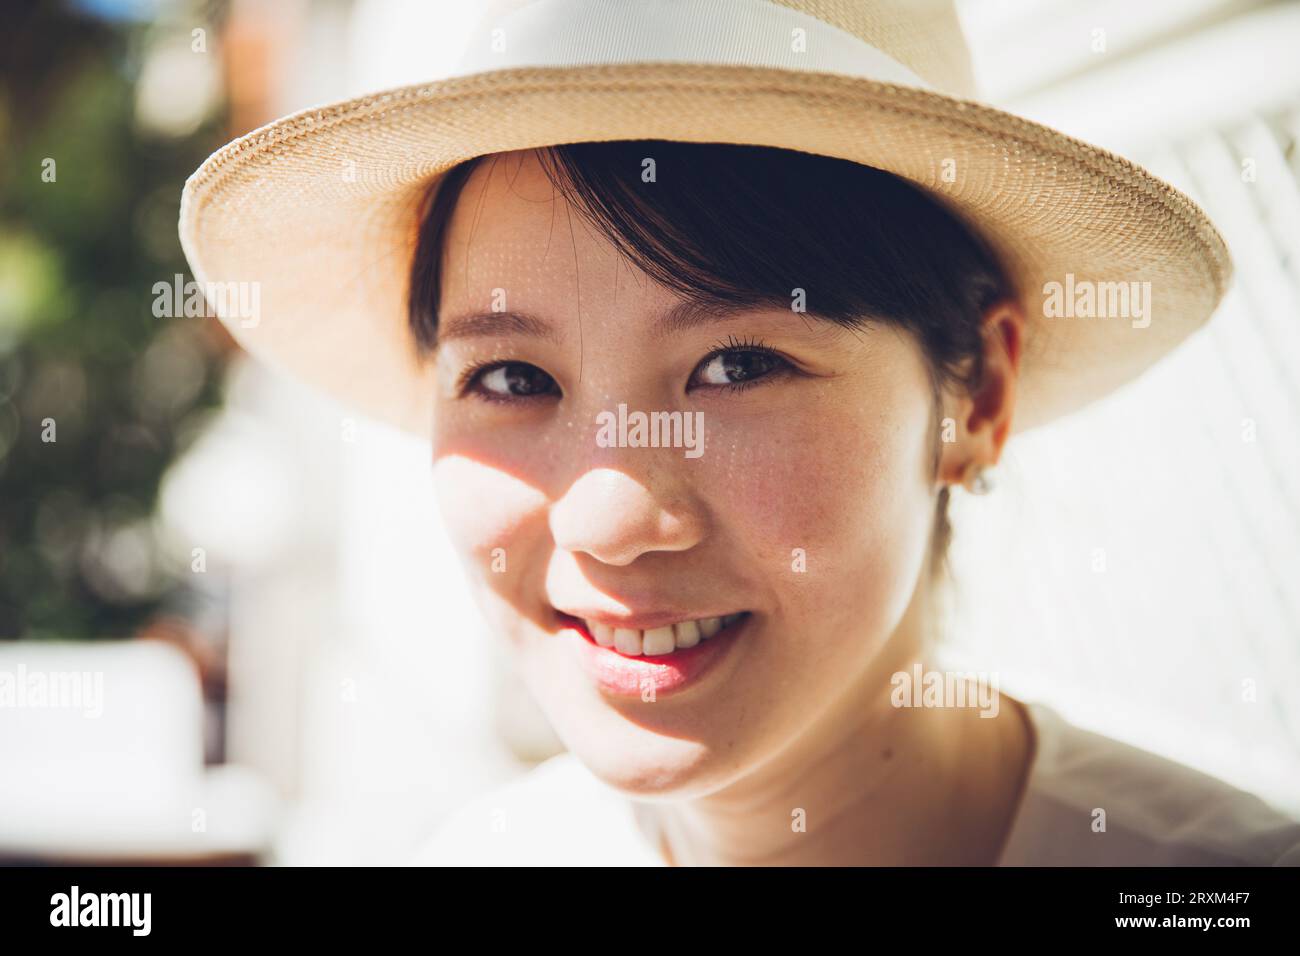 Smiling young woman wearing straw hat Stock Photo